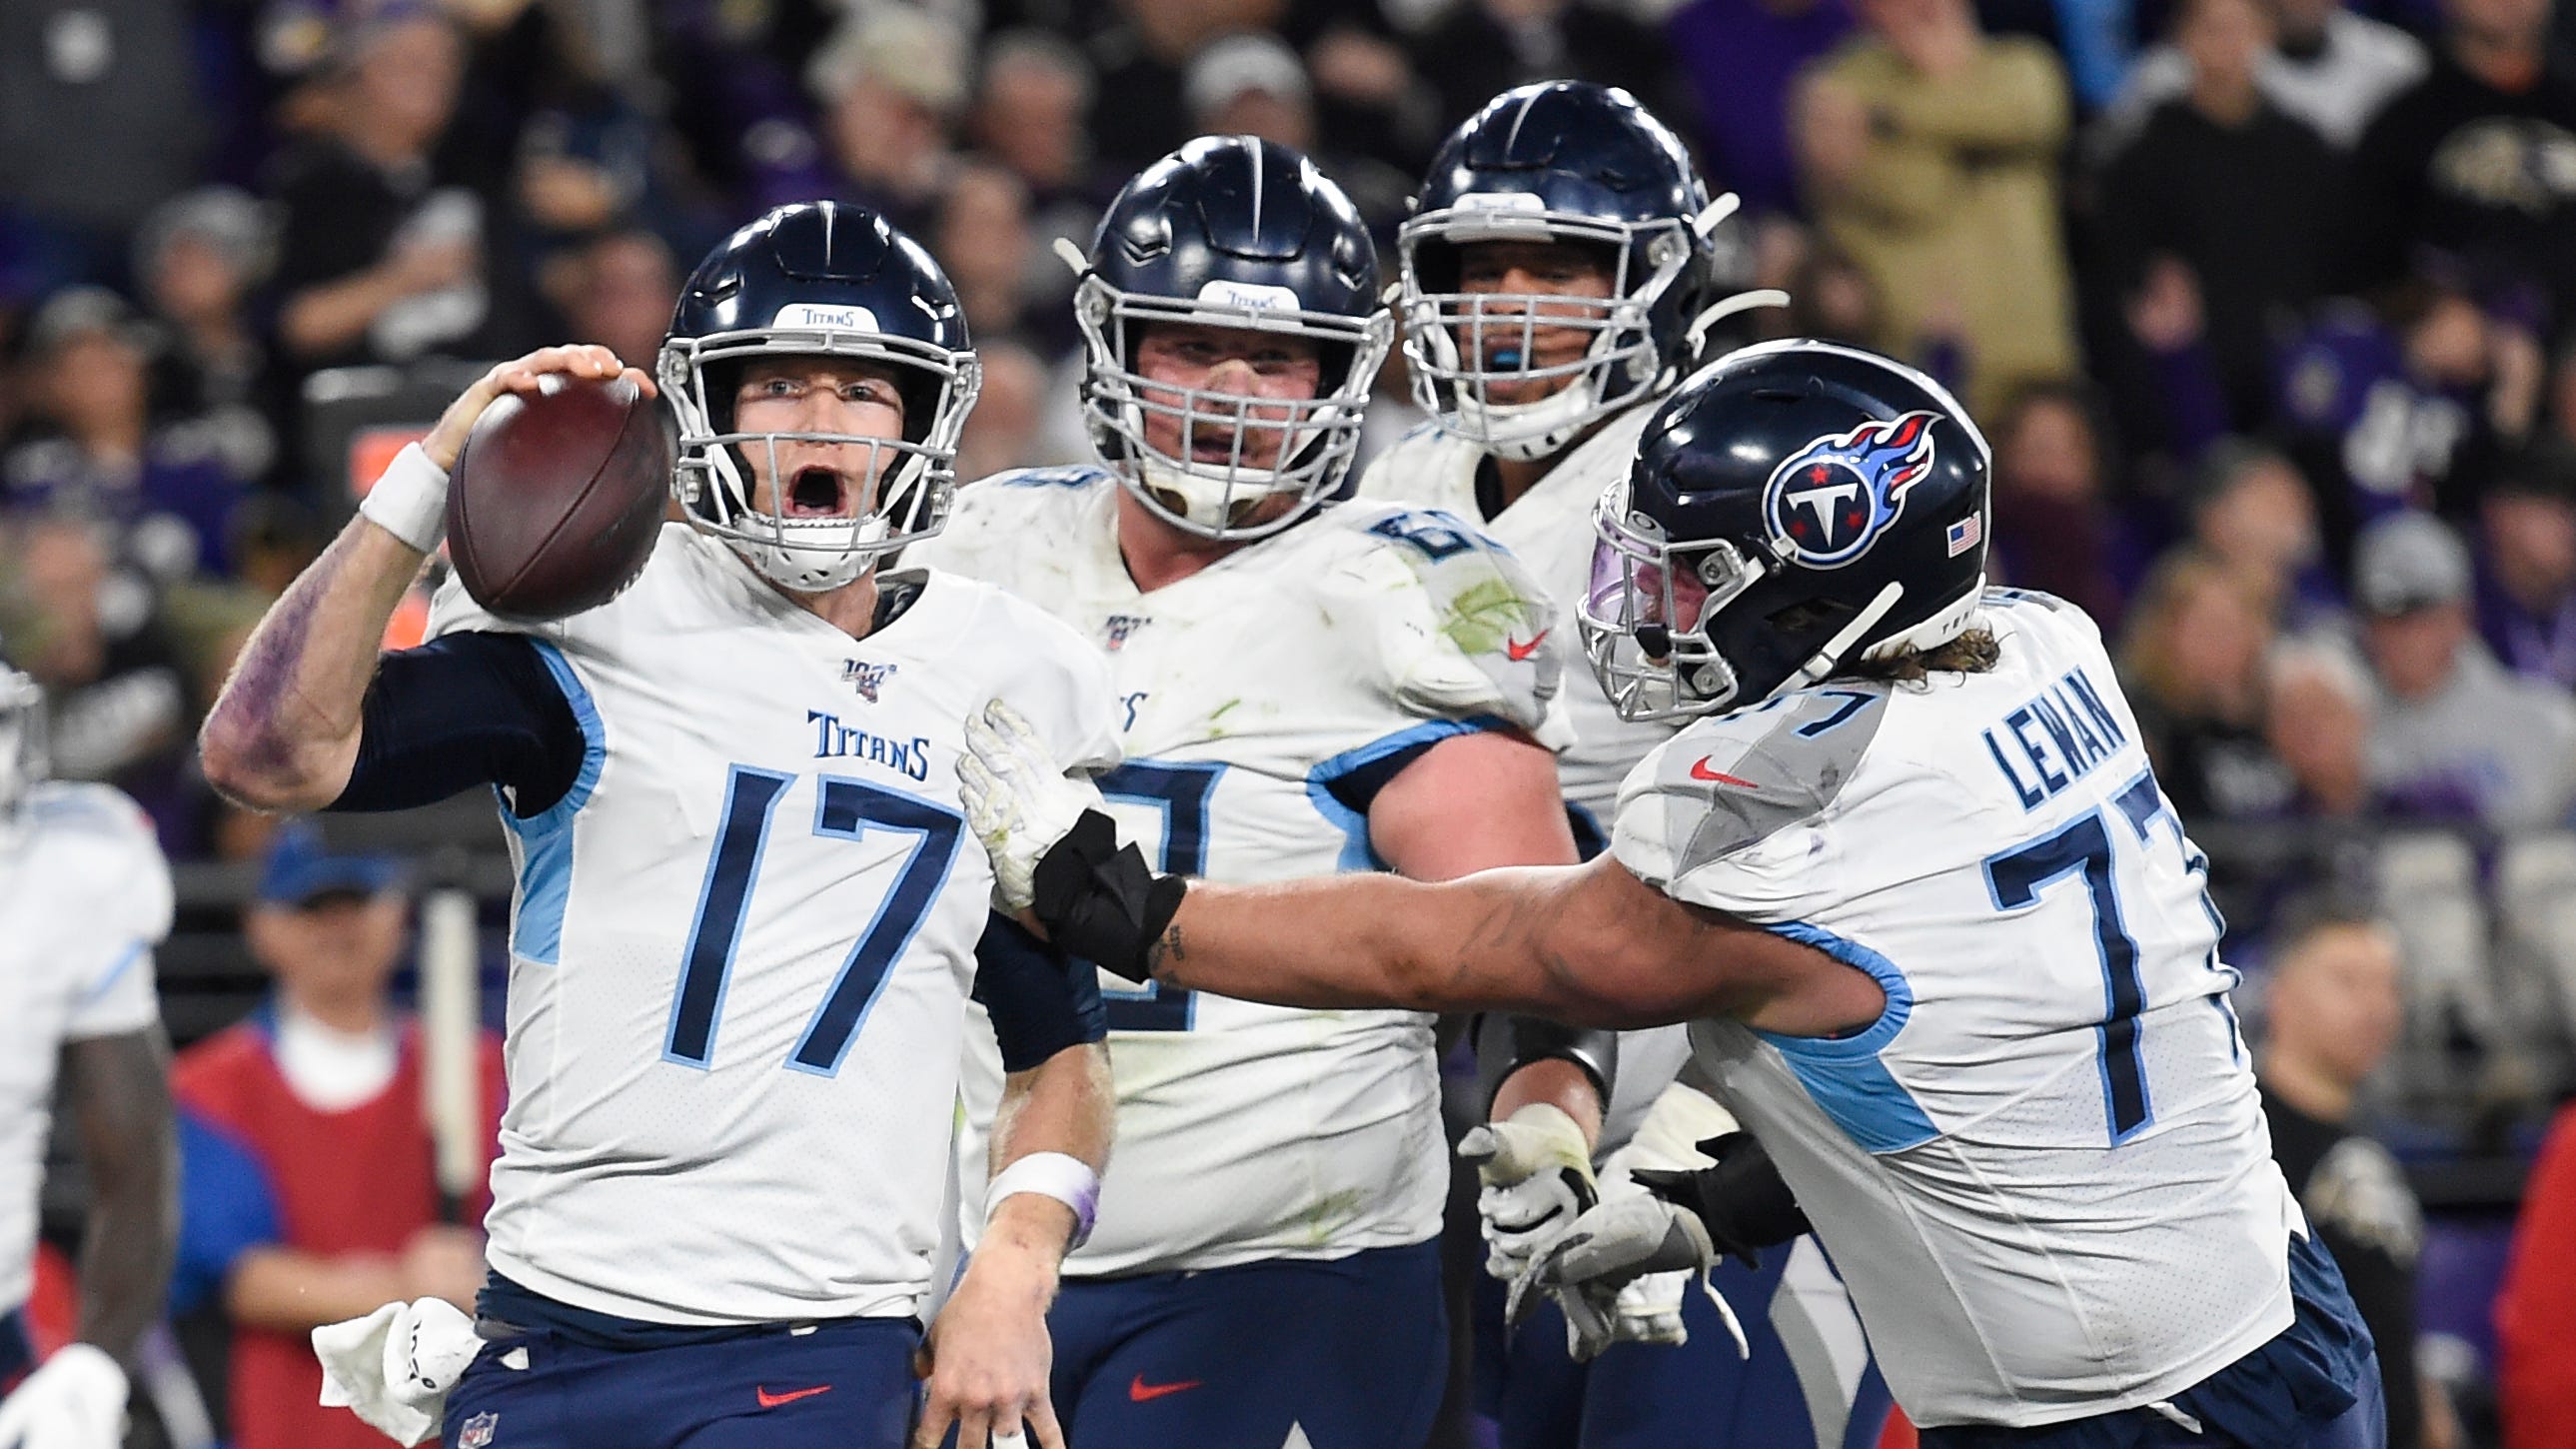 Tennessee Titans might be unstoppable in NFL playoffs after latest win